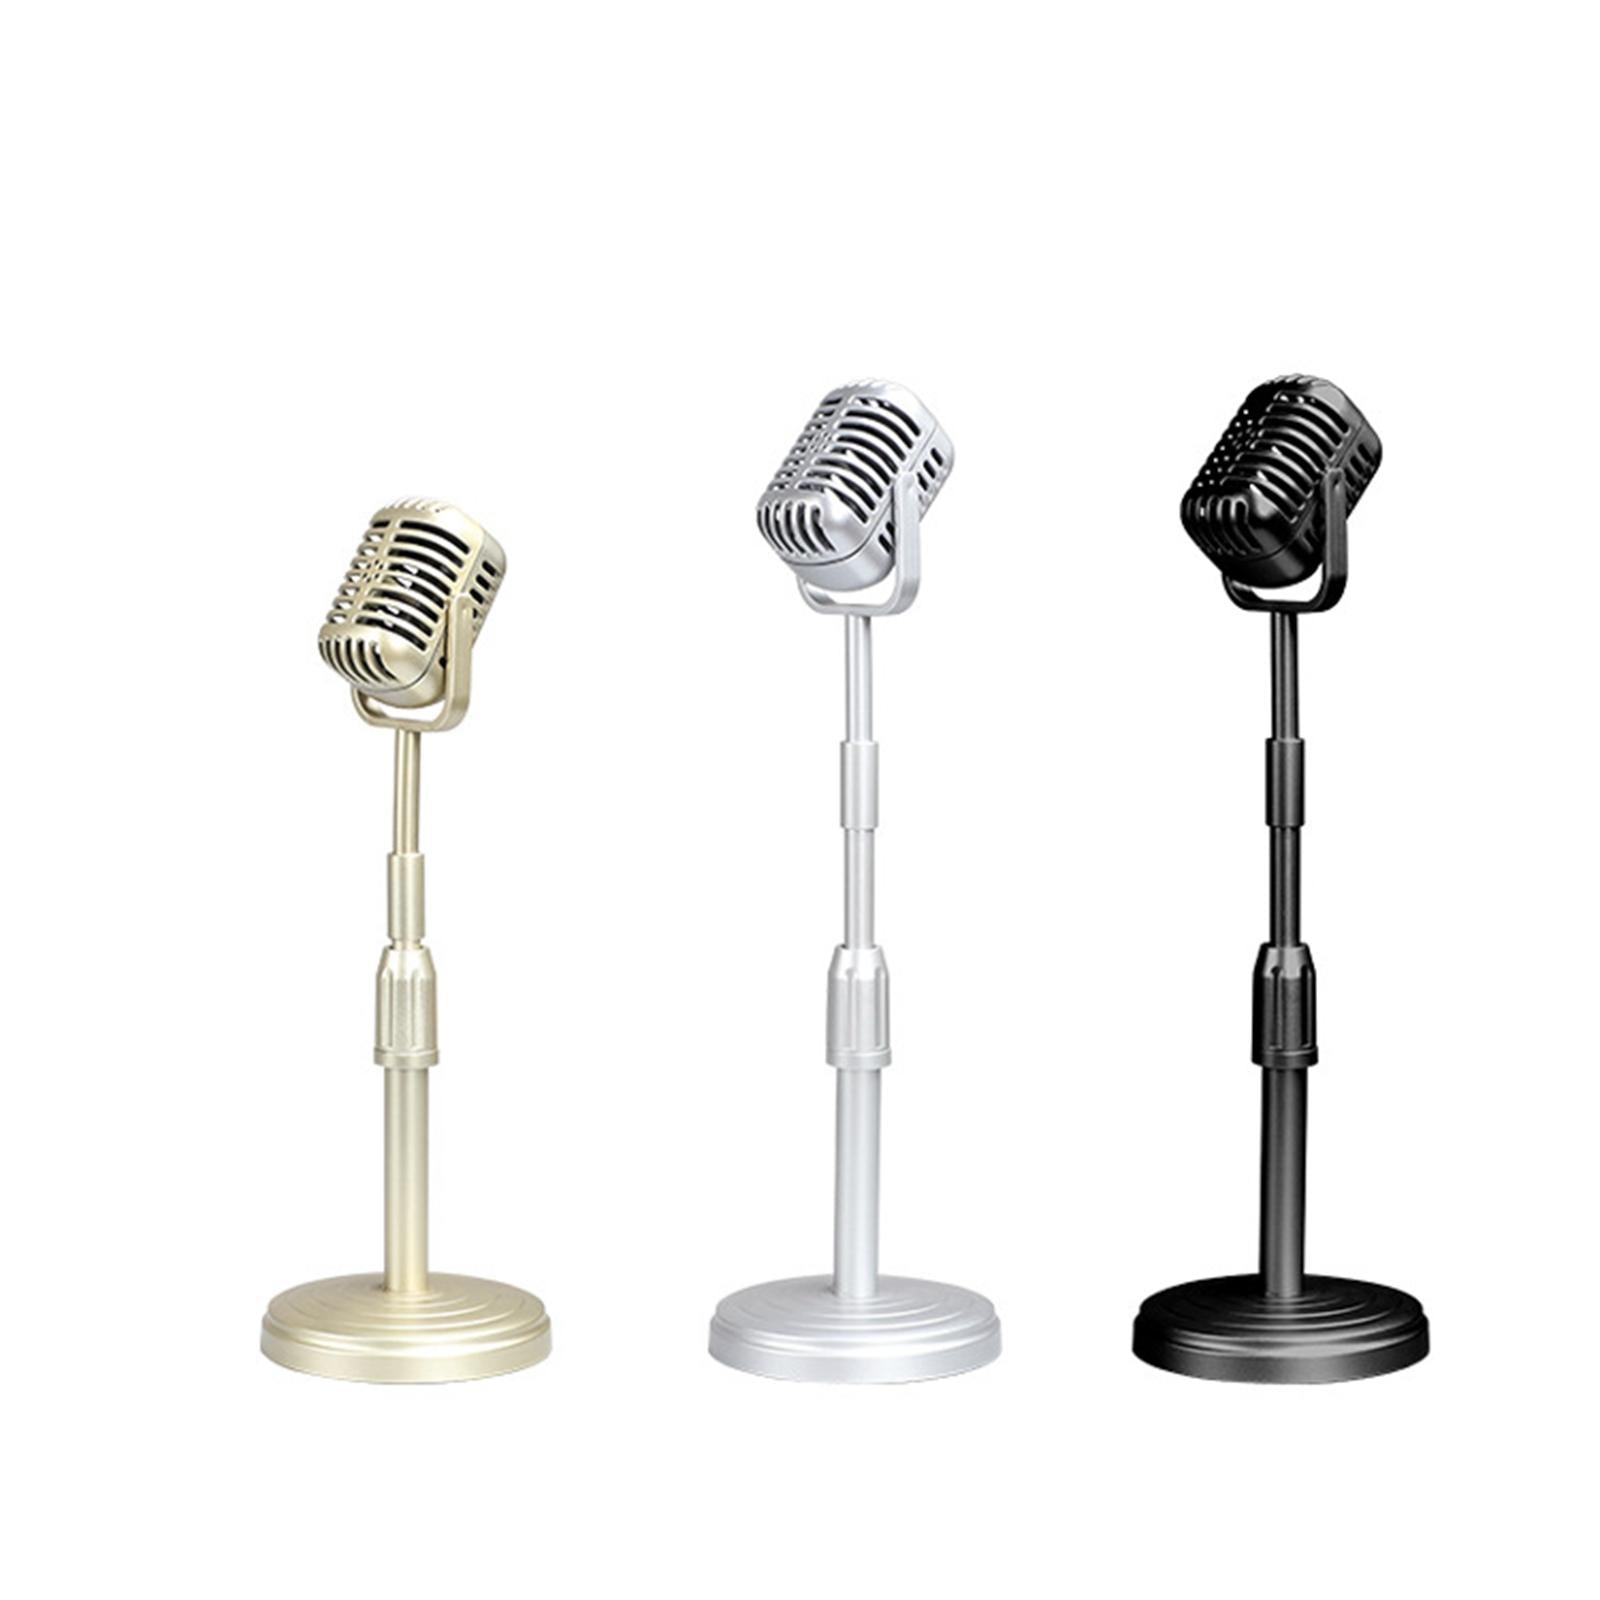 Simulation Classic Retro Vintage Style Mic Prop Photography with Stand Black